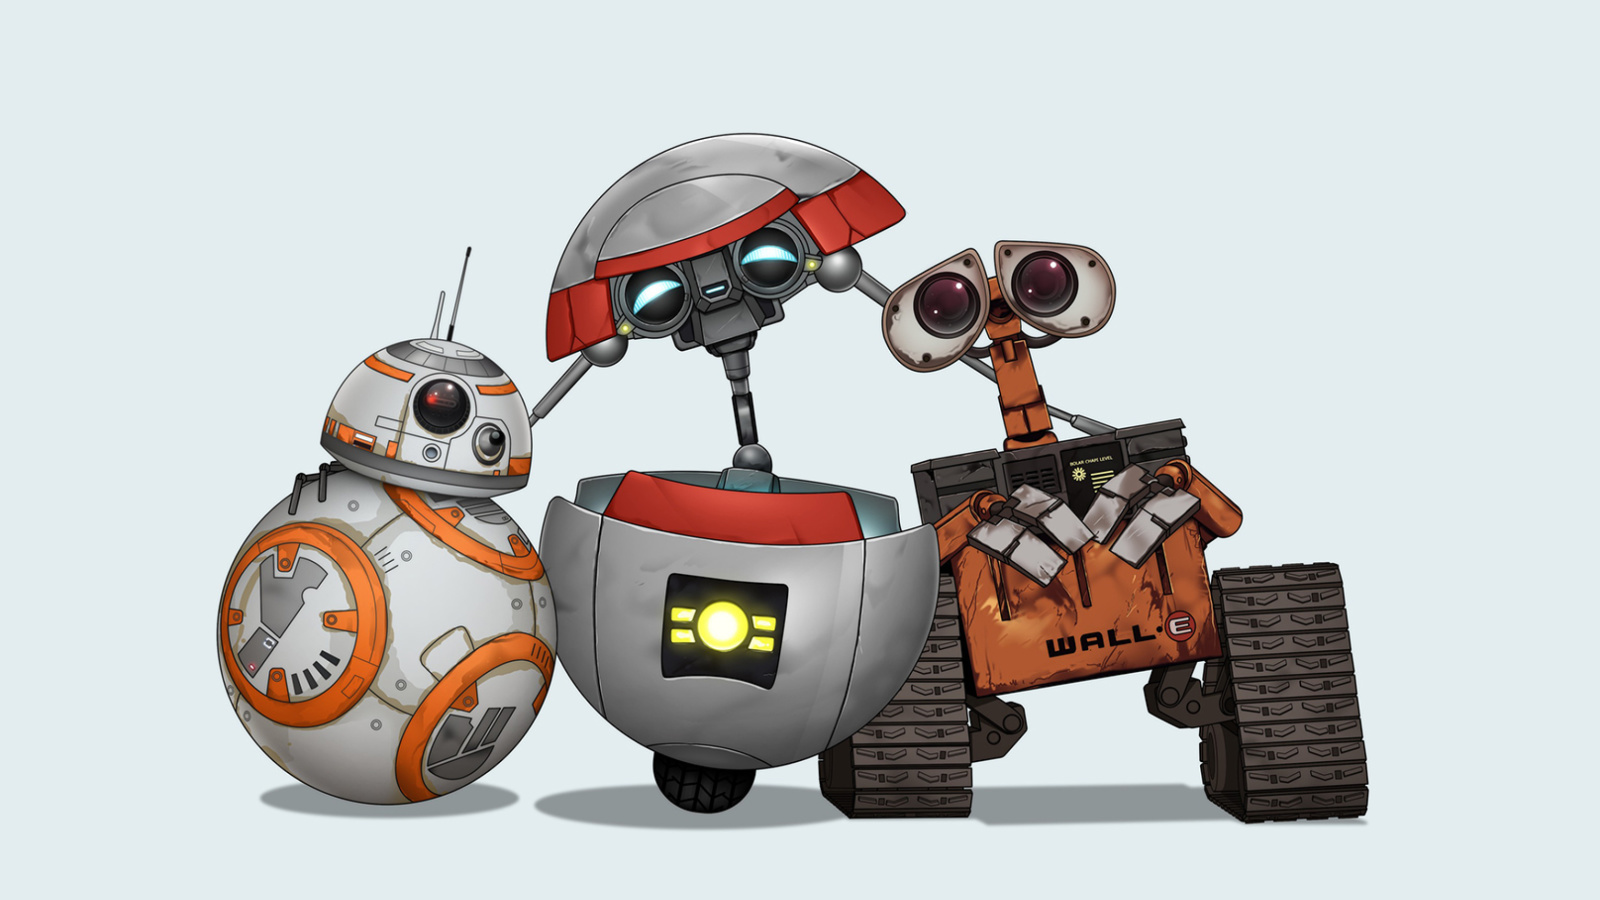 Star Wars and Walle wallpaper 1600x900